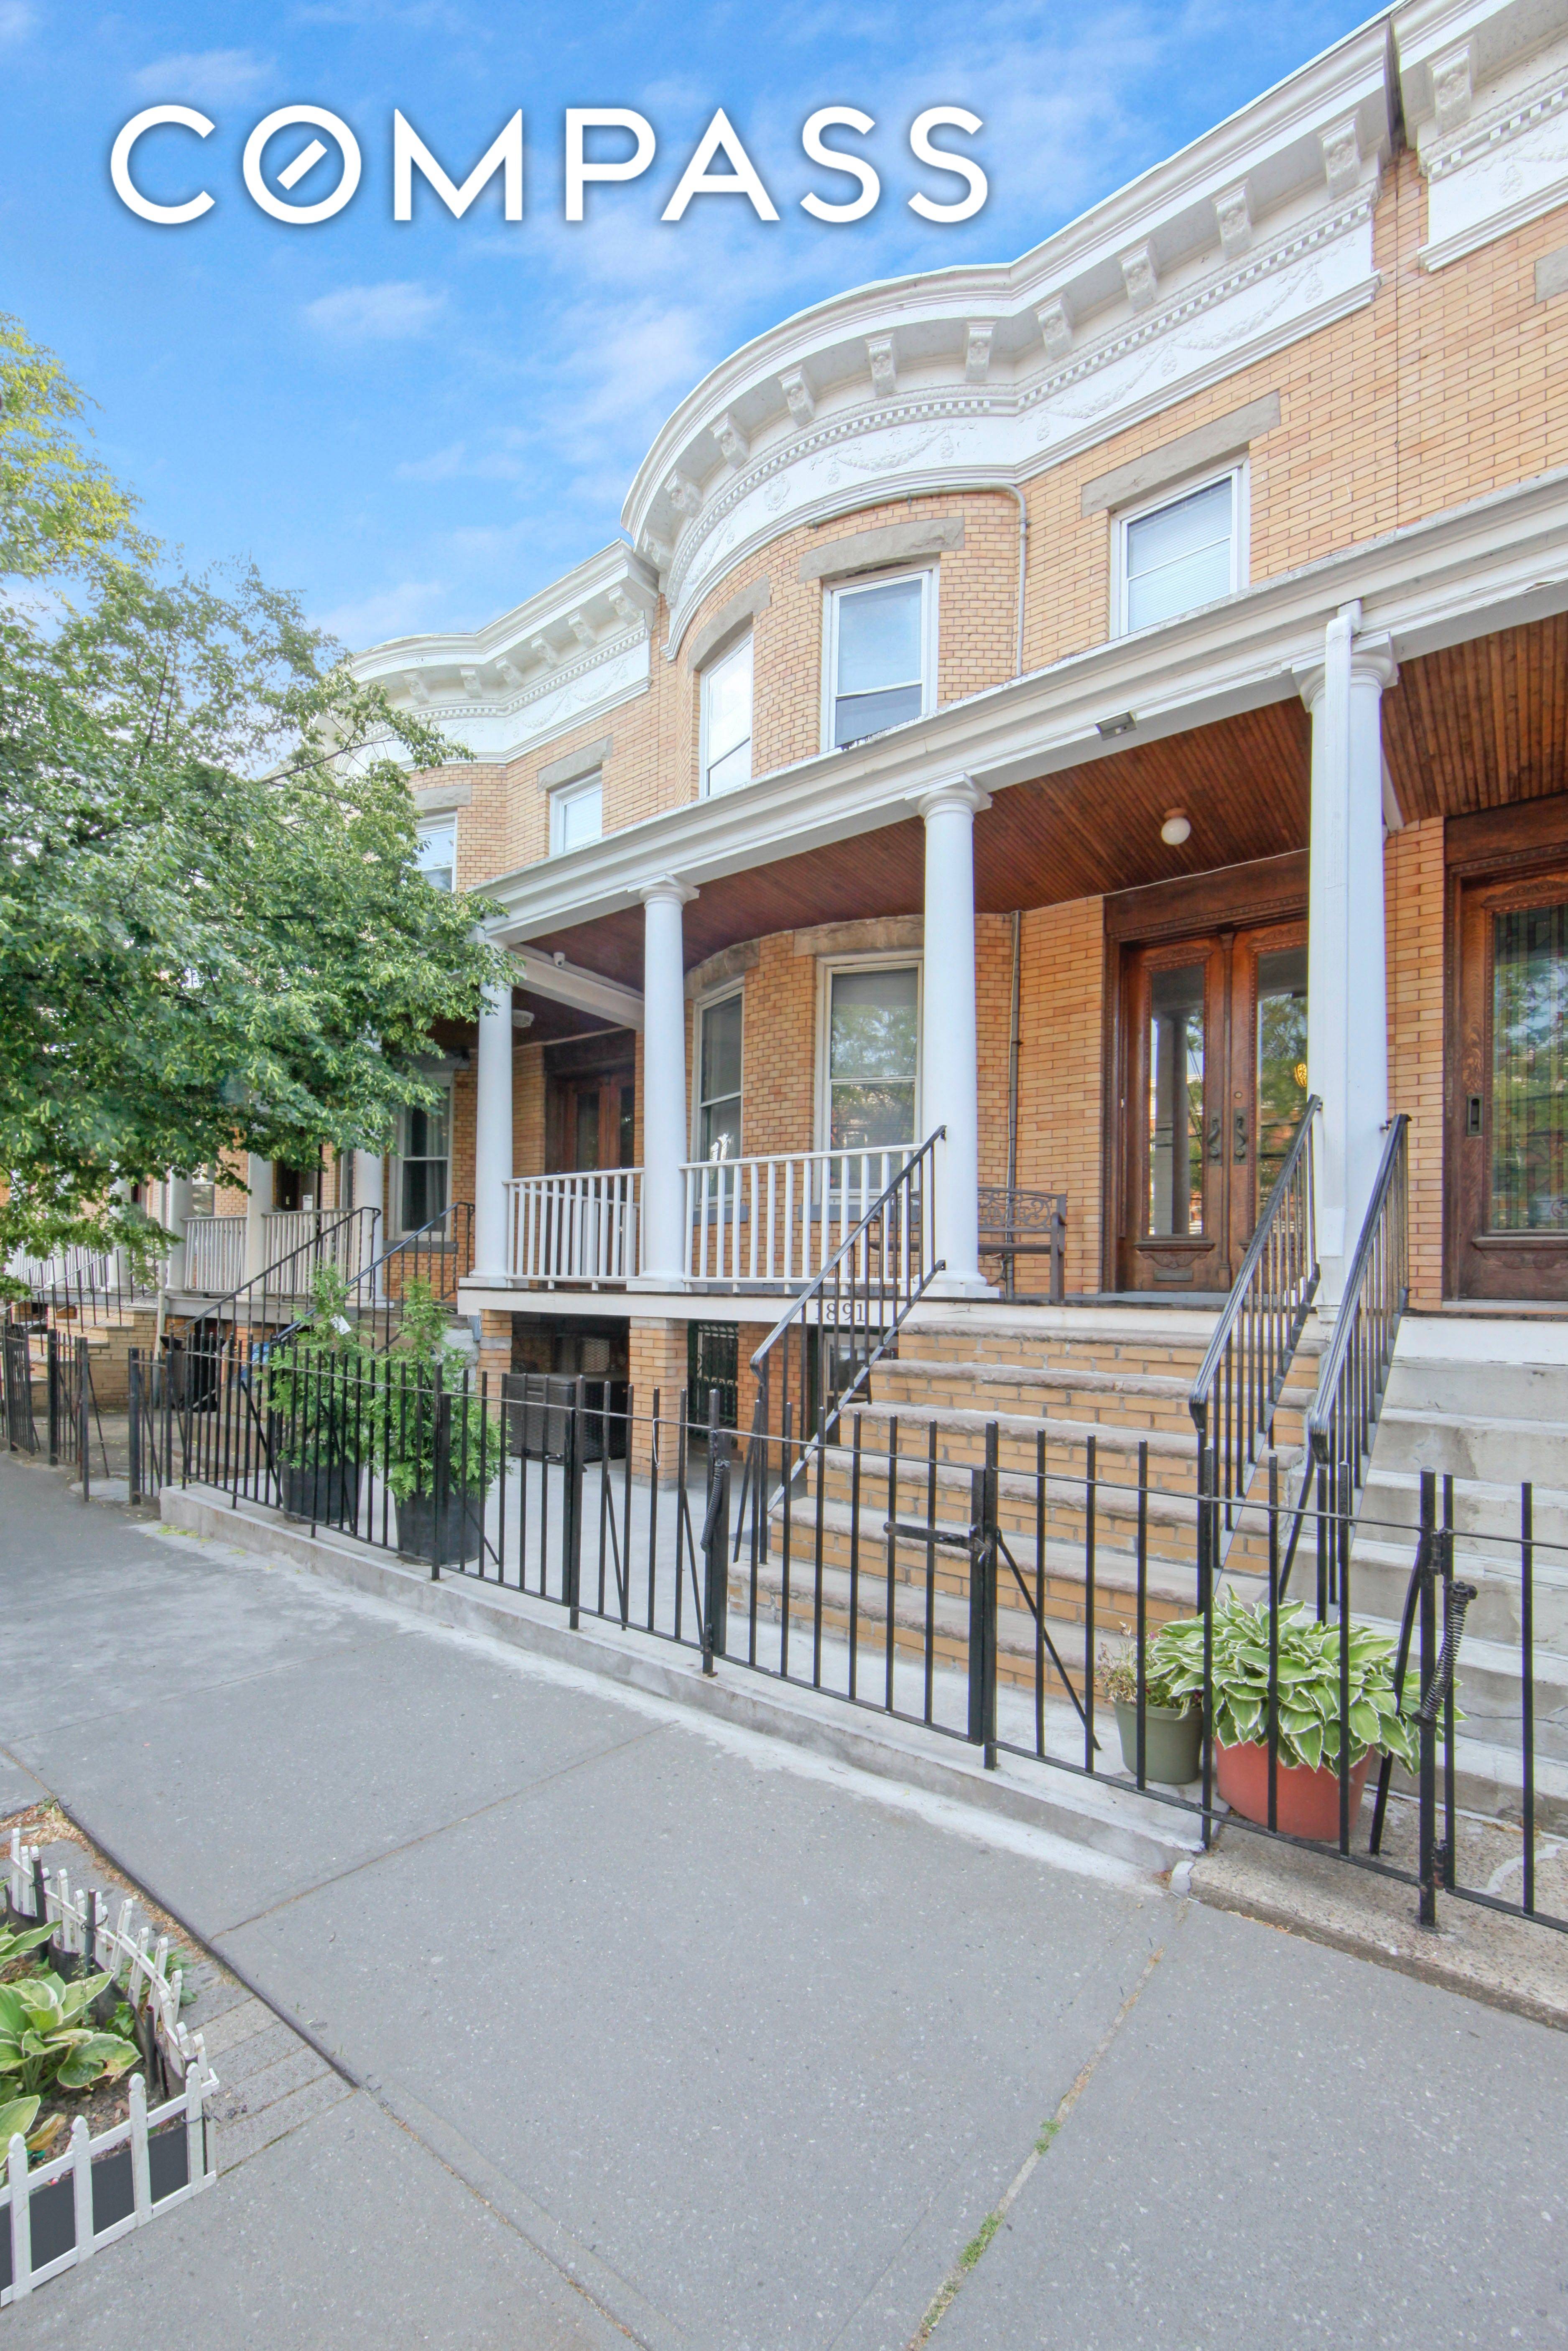 Located in Ridgewood on landmarked Stockholm Street where the road is paved with yellow brick and the townhomes are lined with Doric columned porches.